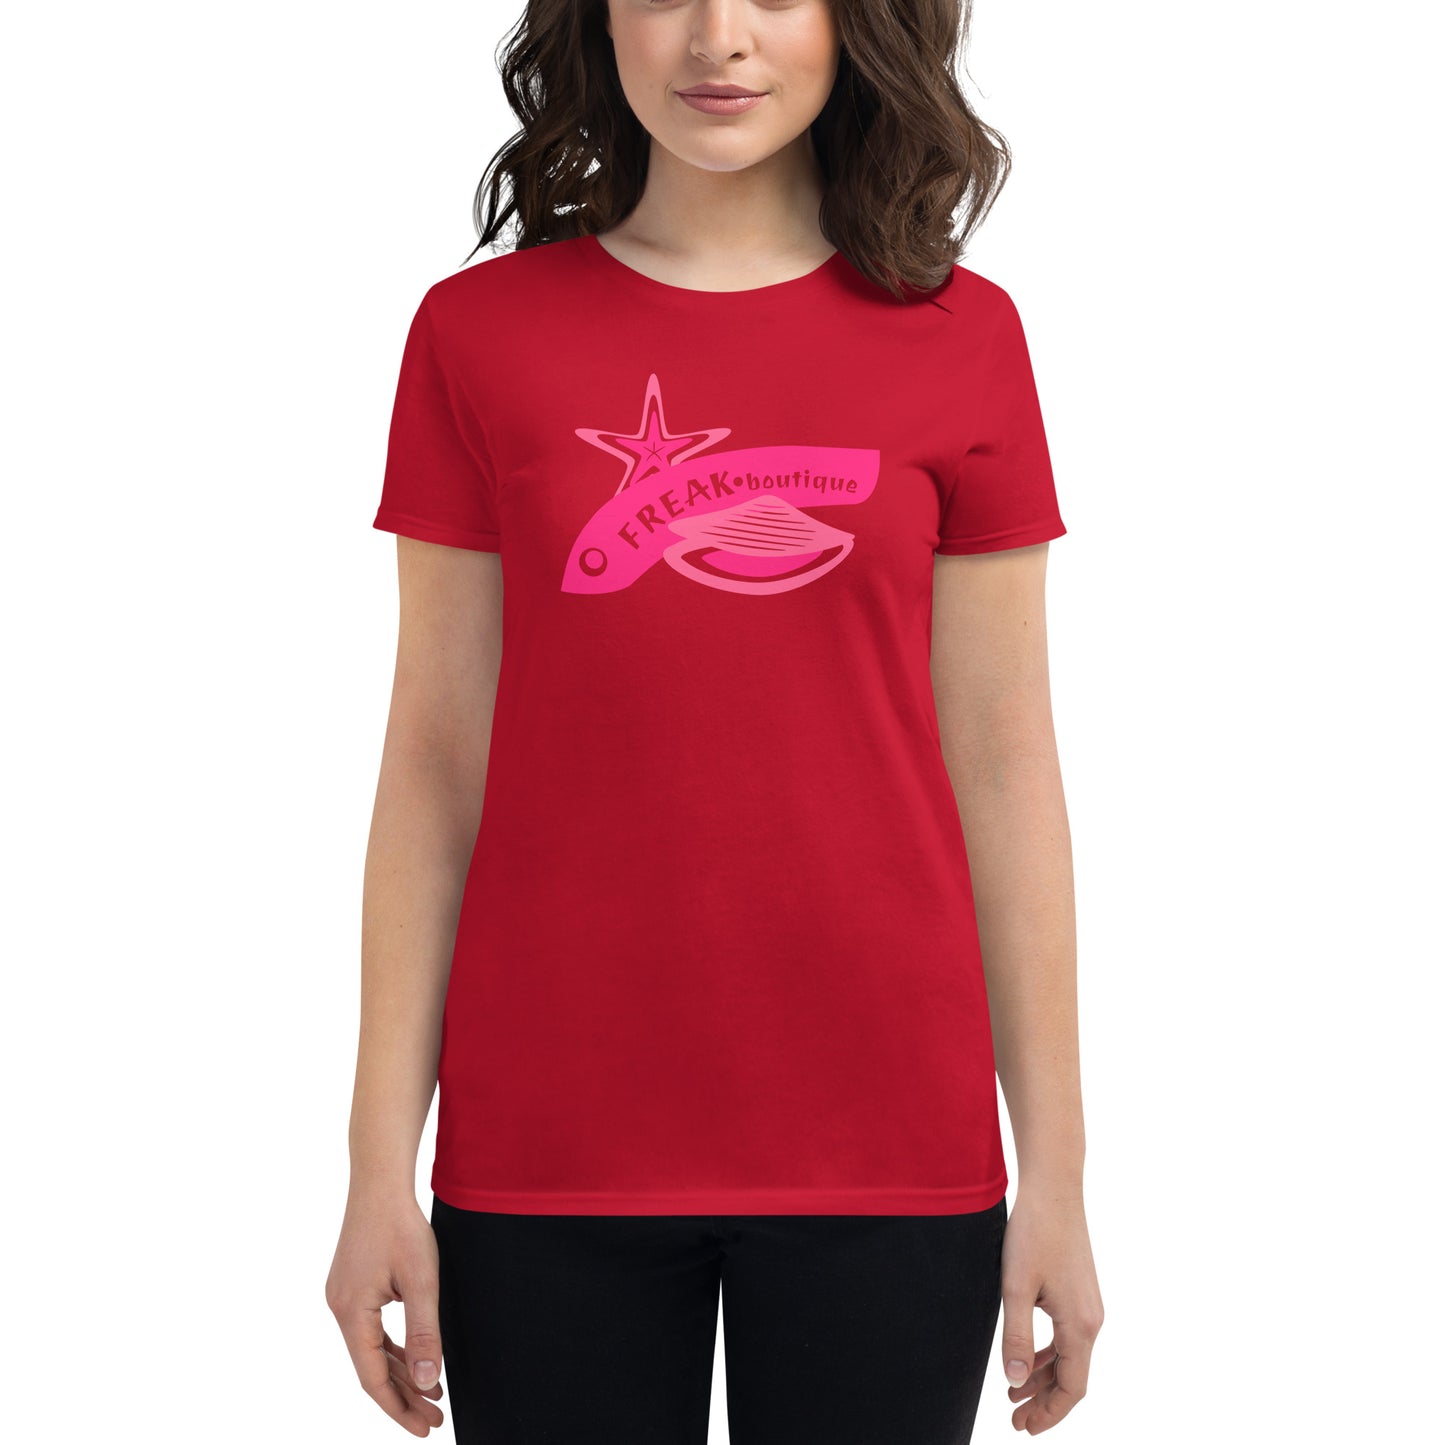 Triangle amoureux logo red women's t-shirt on model